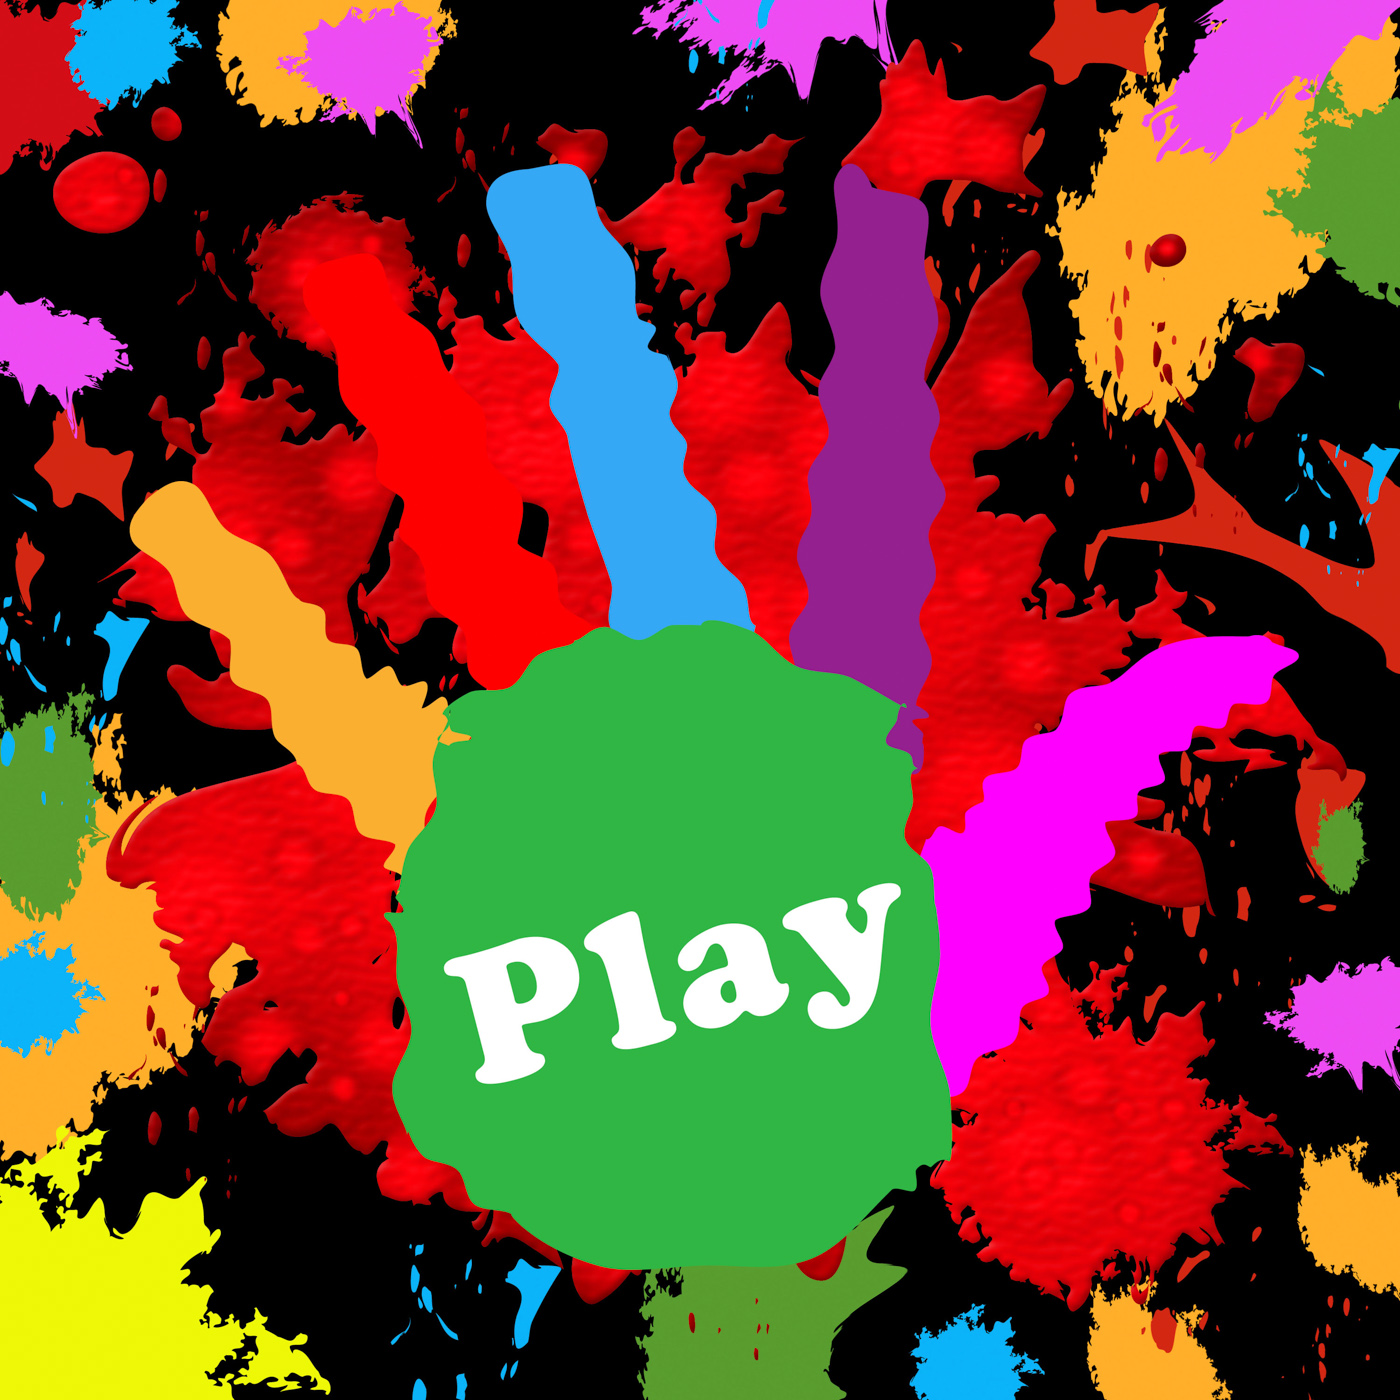 Play handprint represents free time and kids photo